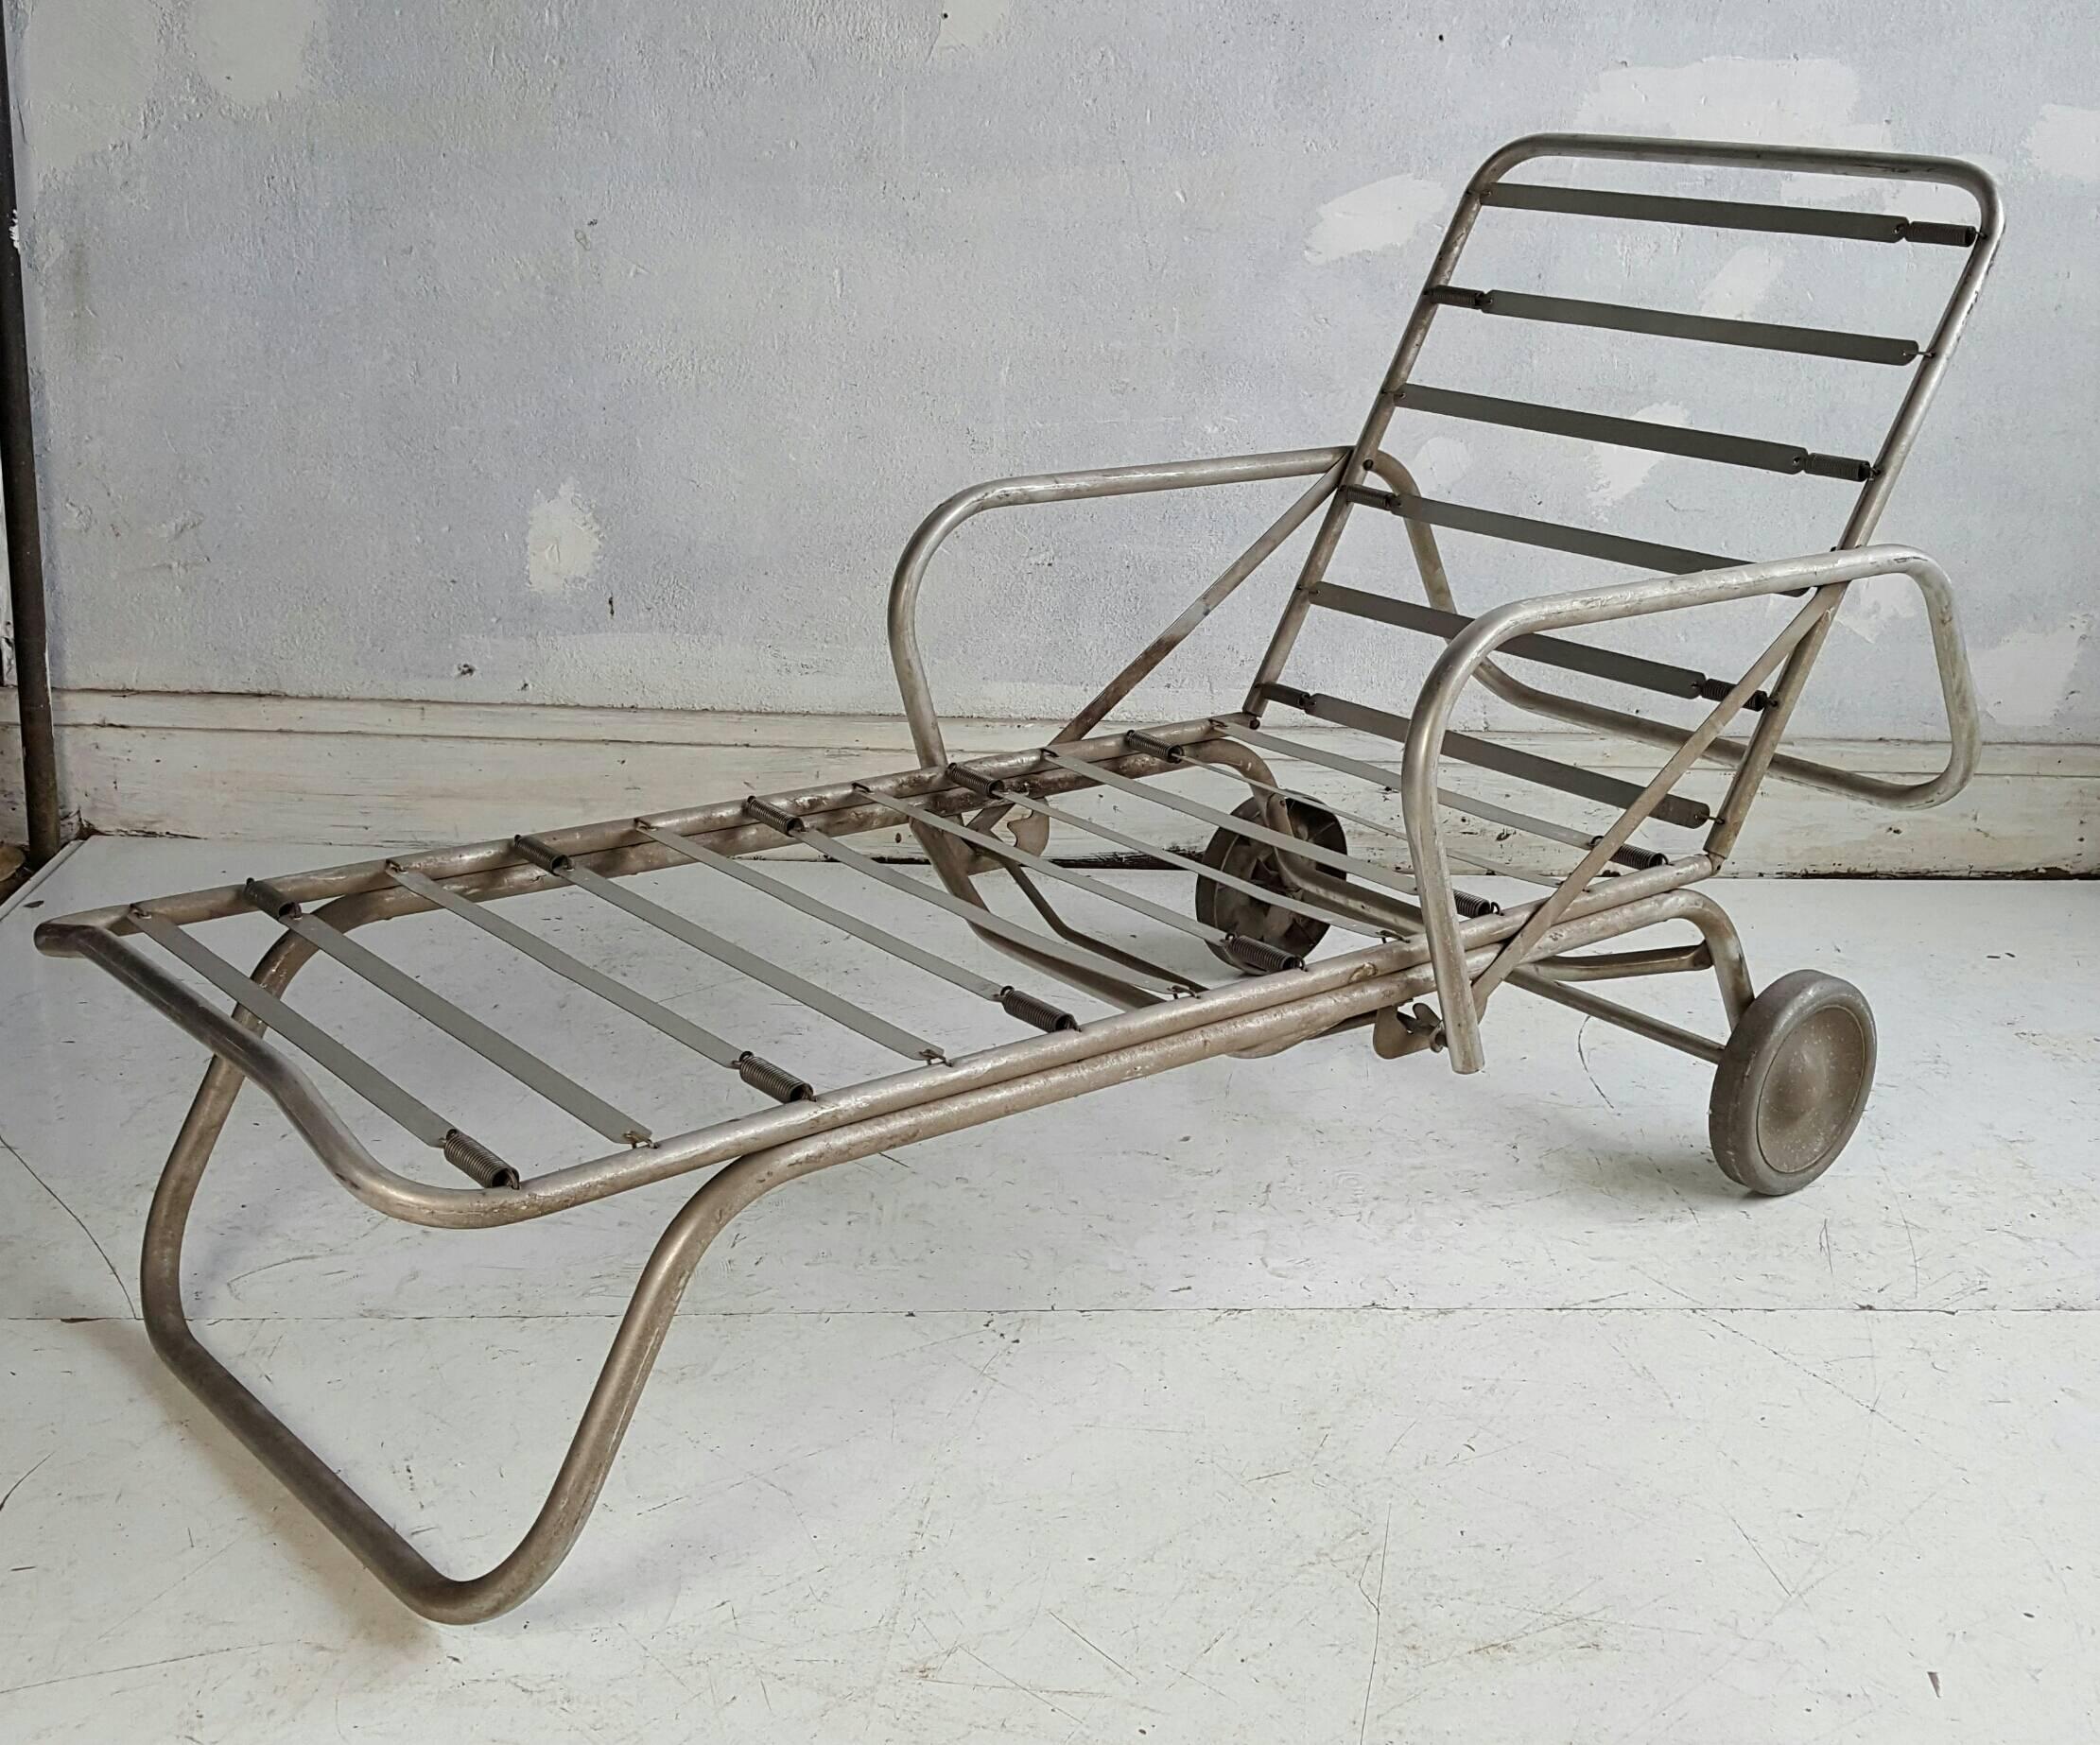 Classic Aluminum outdoor living,, Pair of matching chaise lounges manufactured by Deeco,Craftsman in Aluminum ,California,Wonderful Art Deco ,Machine Age style.  Reminiscent of the classic sought after aluminum pieces designed by Warren